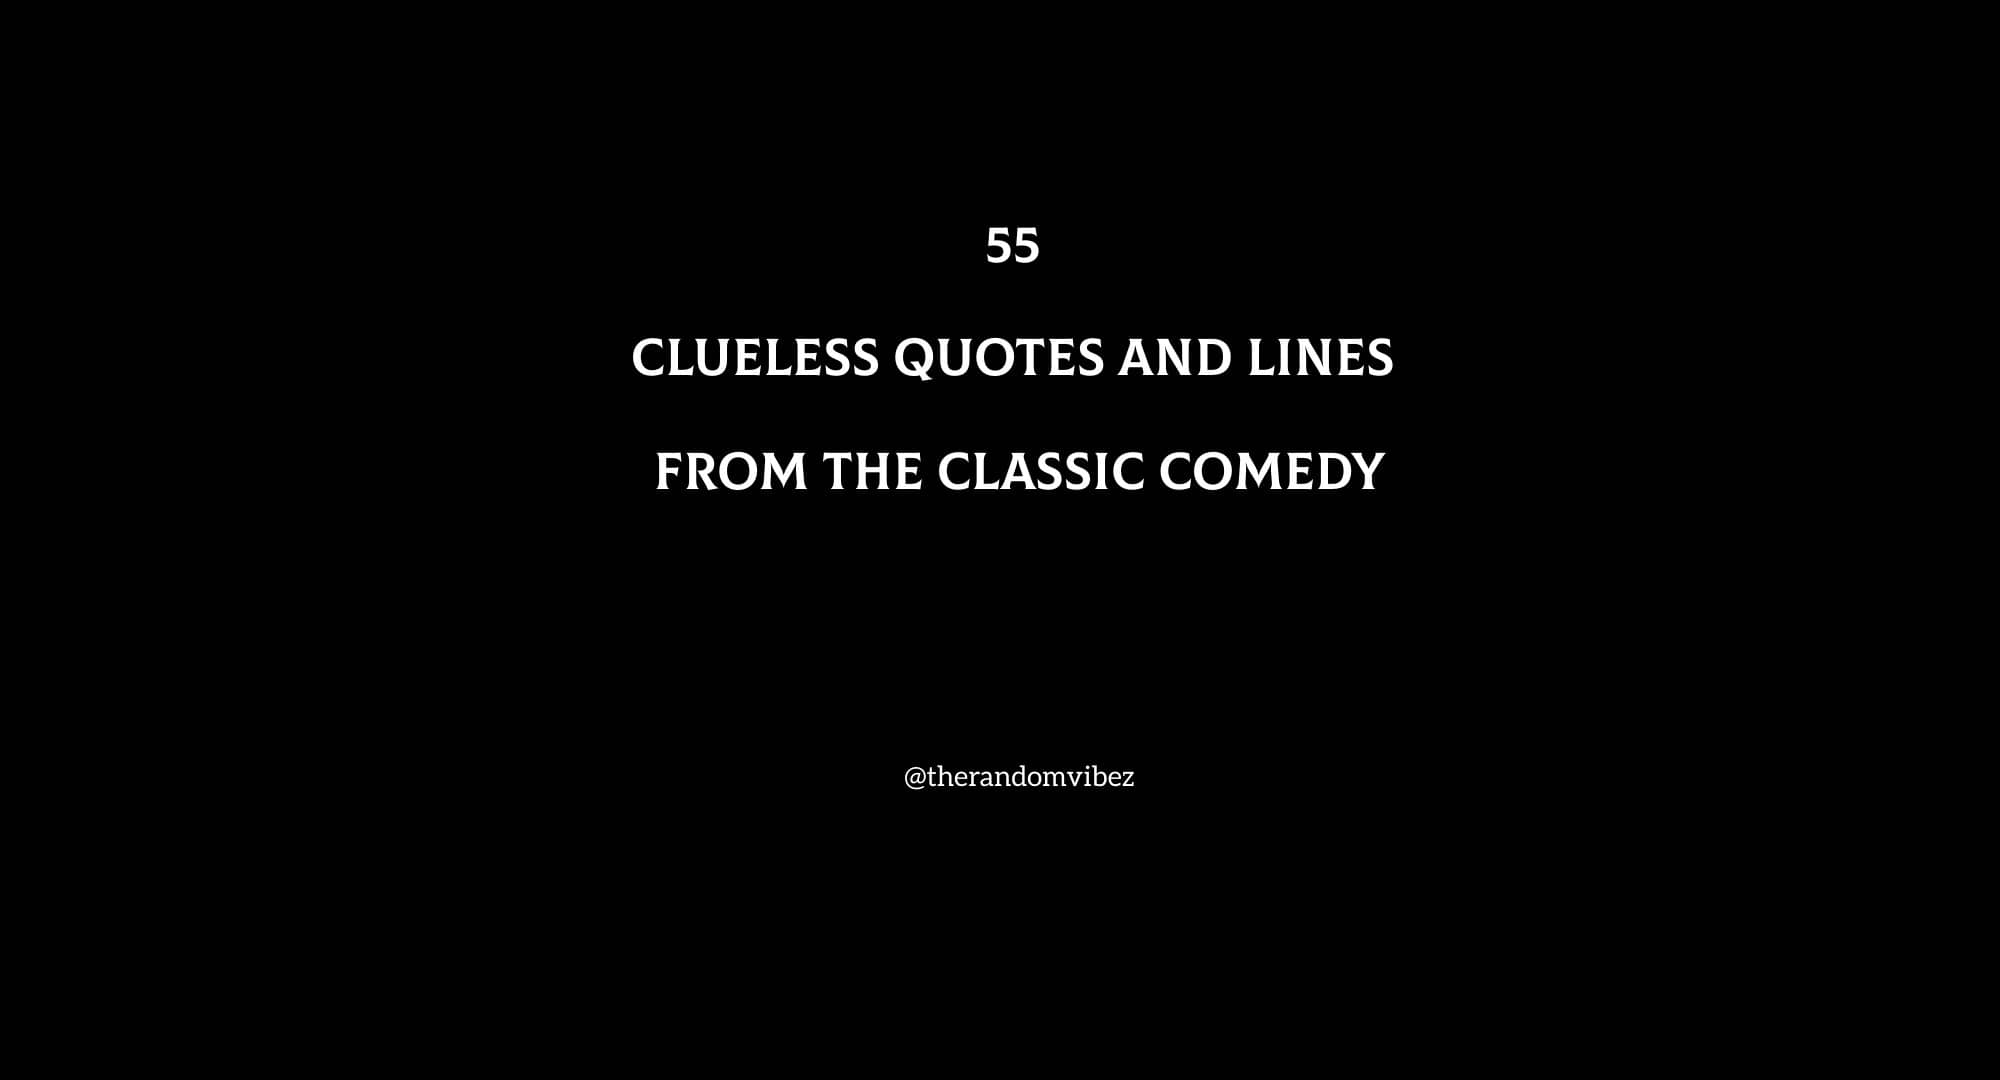 55 Clueless Quotes And Lines From The Classic Comedy